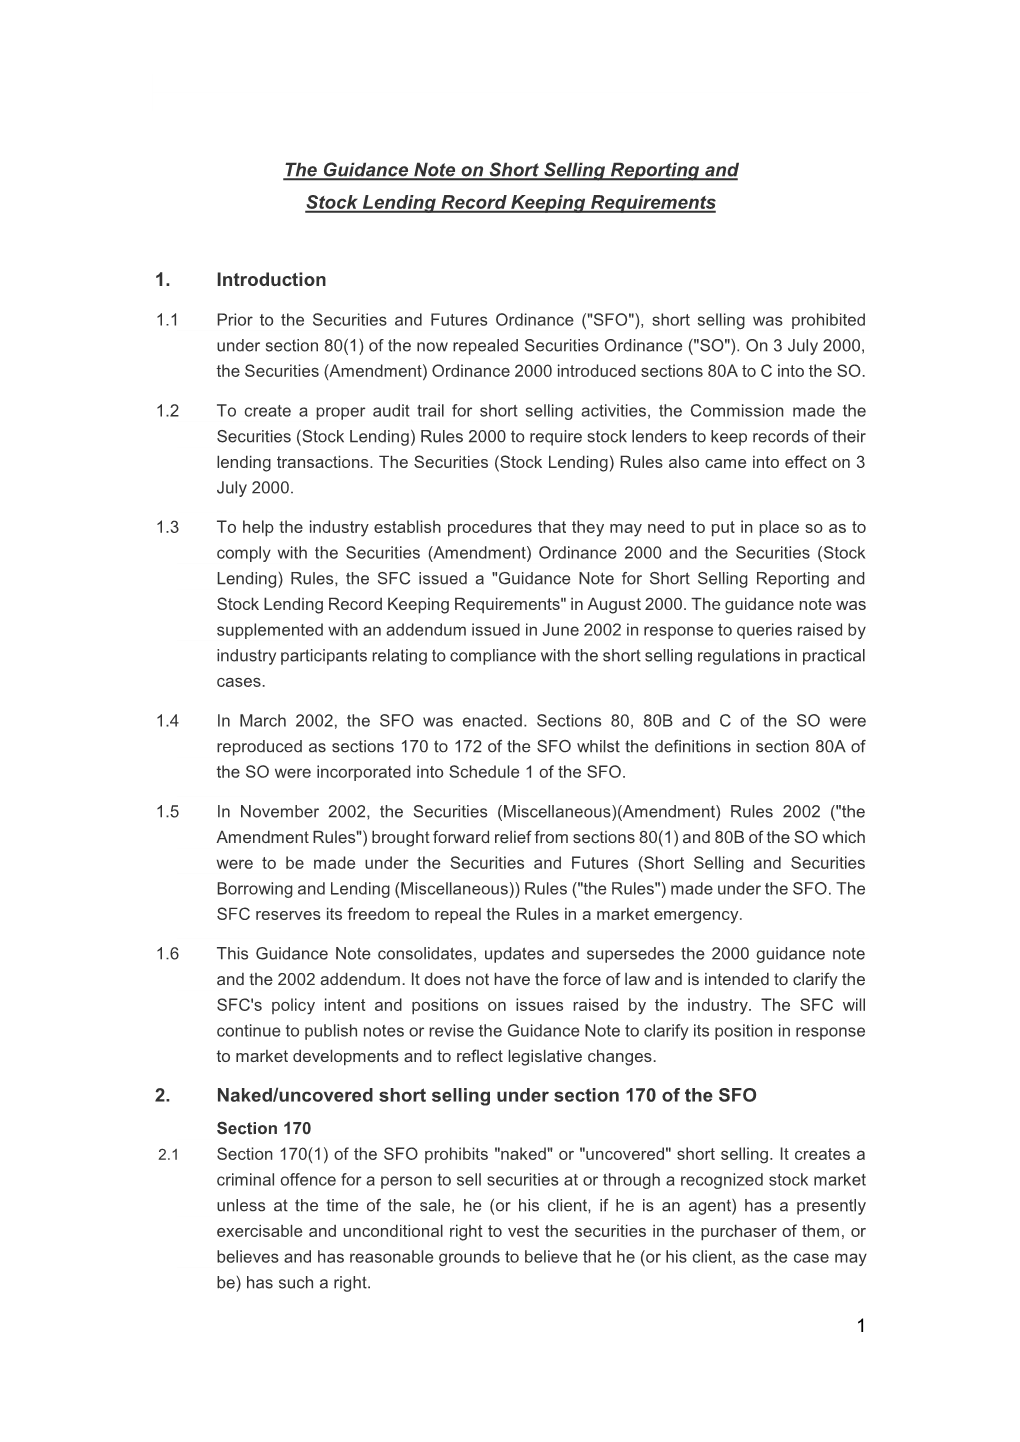 1 the Guidance Note on Short Selling Reporting and Stock Lending